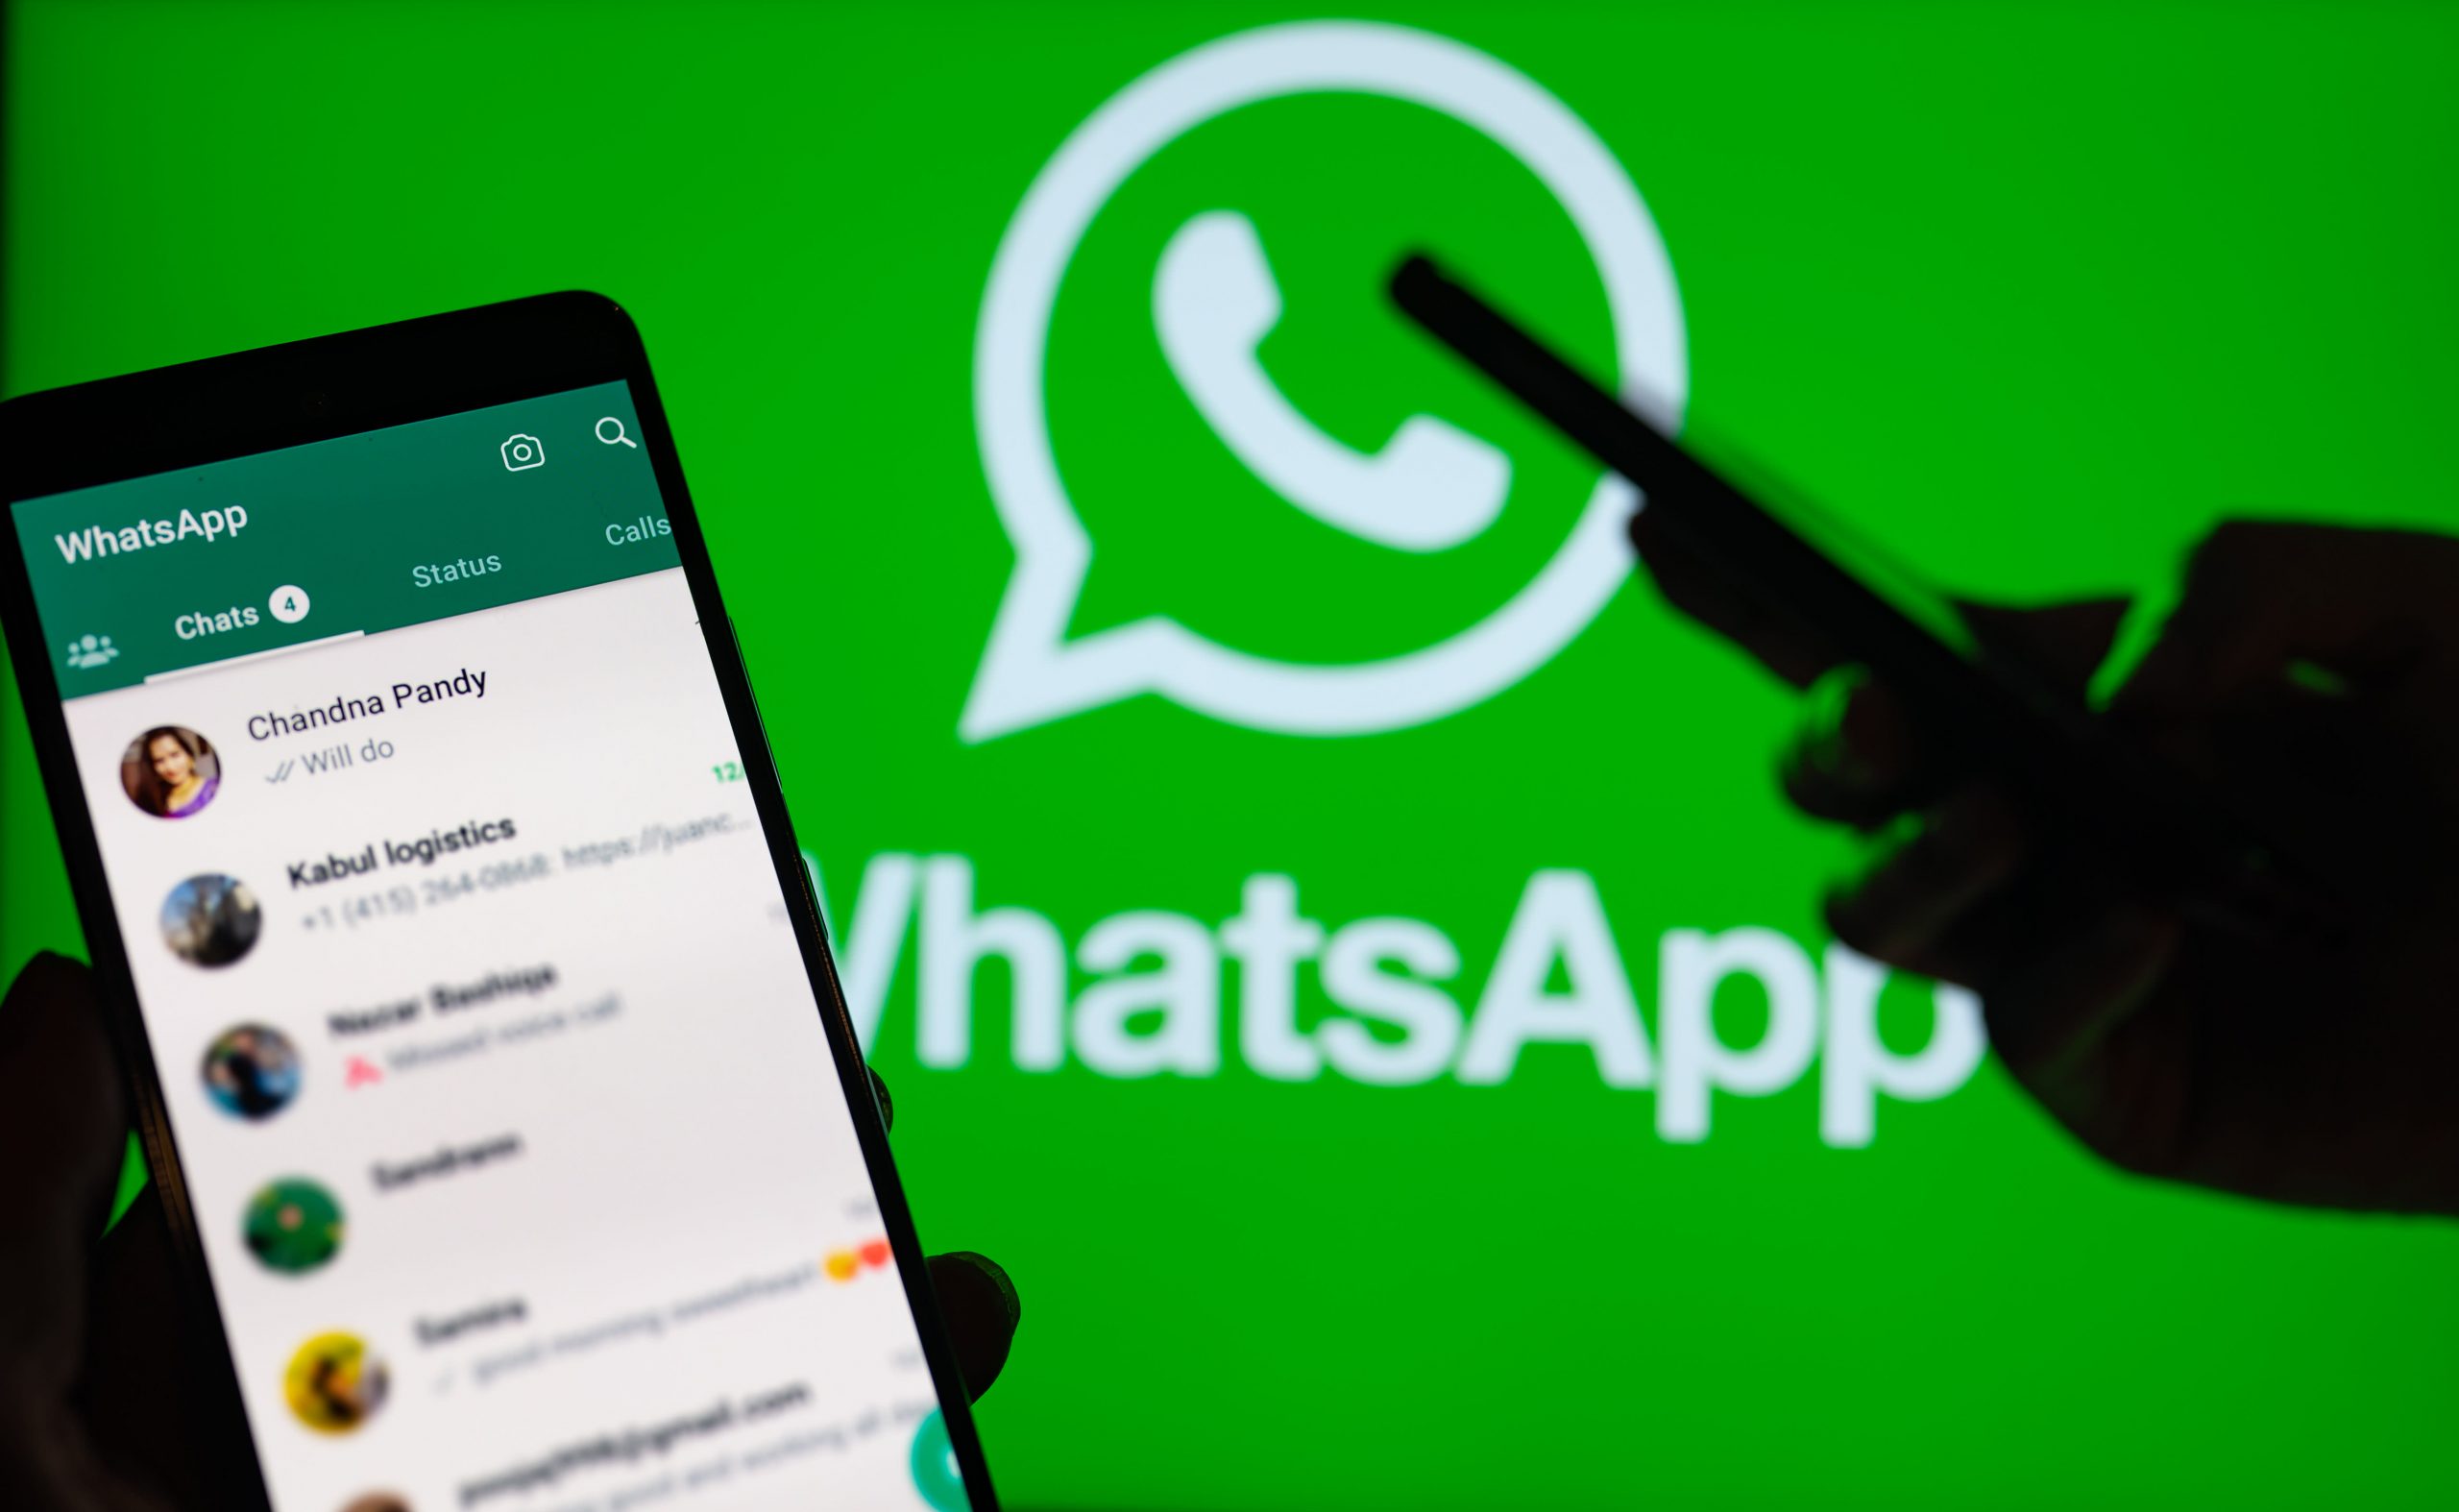 "WhatsApp" Defines New Feature to Support Users' Privacy Security